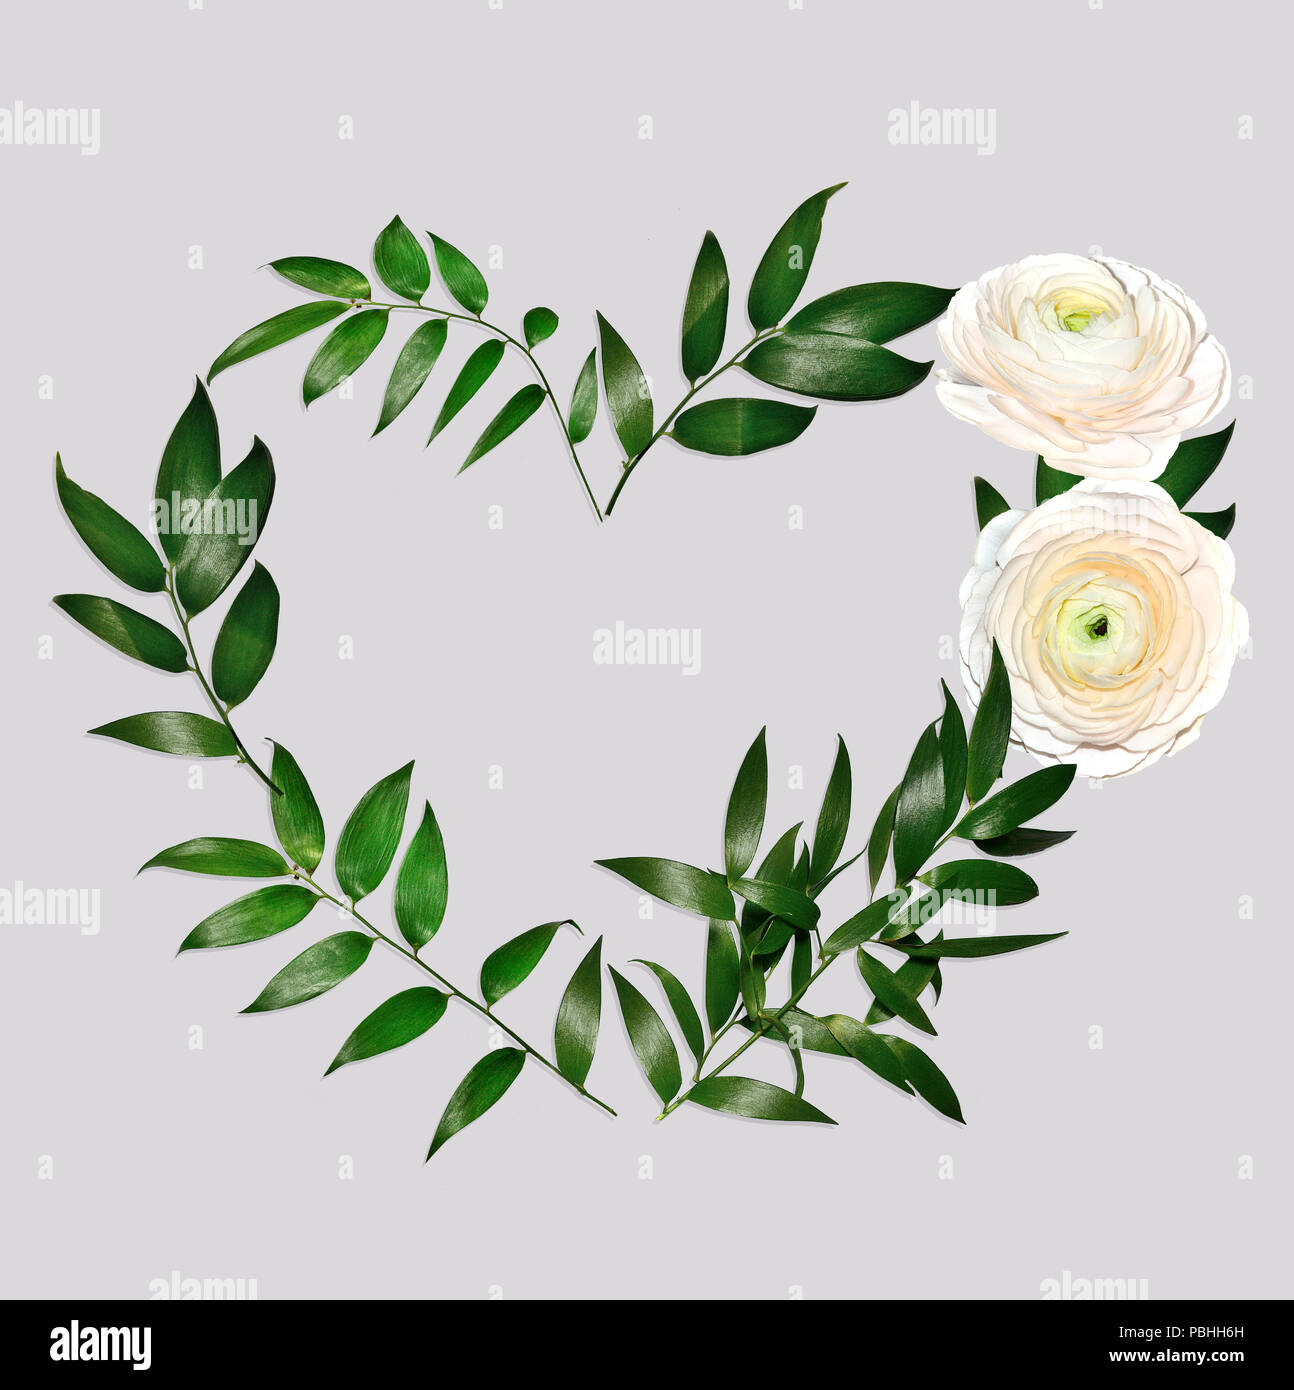 Heart shape floral frame with delicate creamy colored ranunculus flowers and green leaves, flat lay, top view, isolated on pale gray background with c Stock Photo